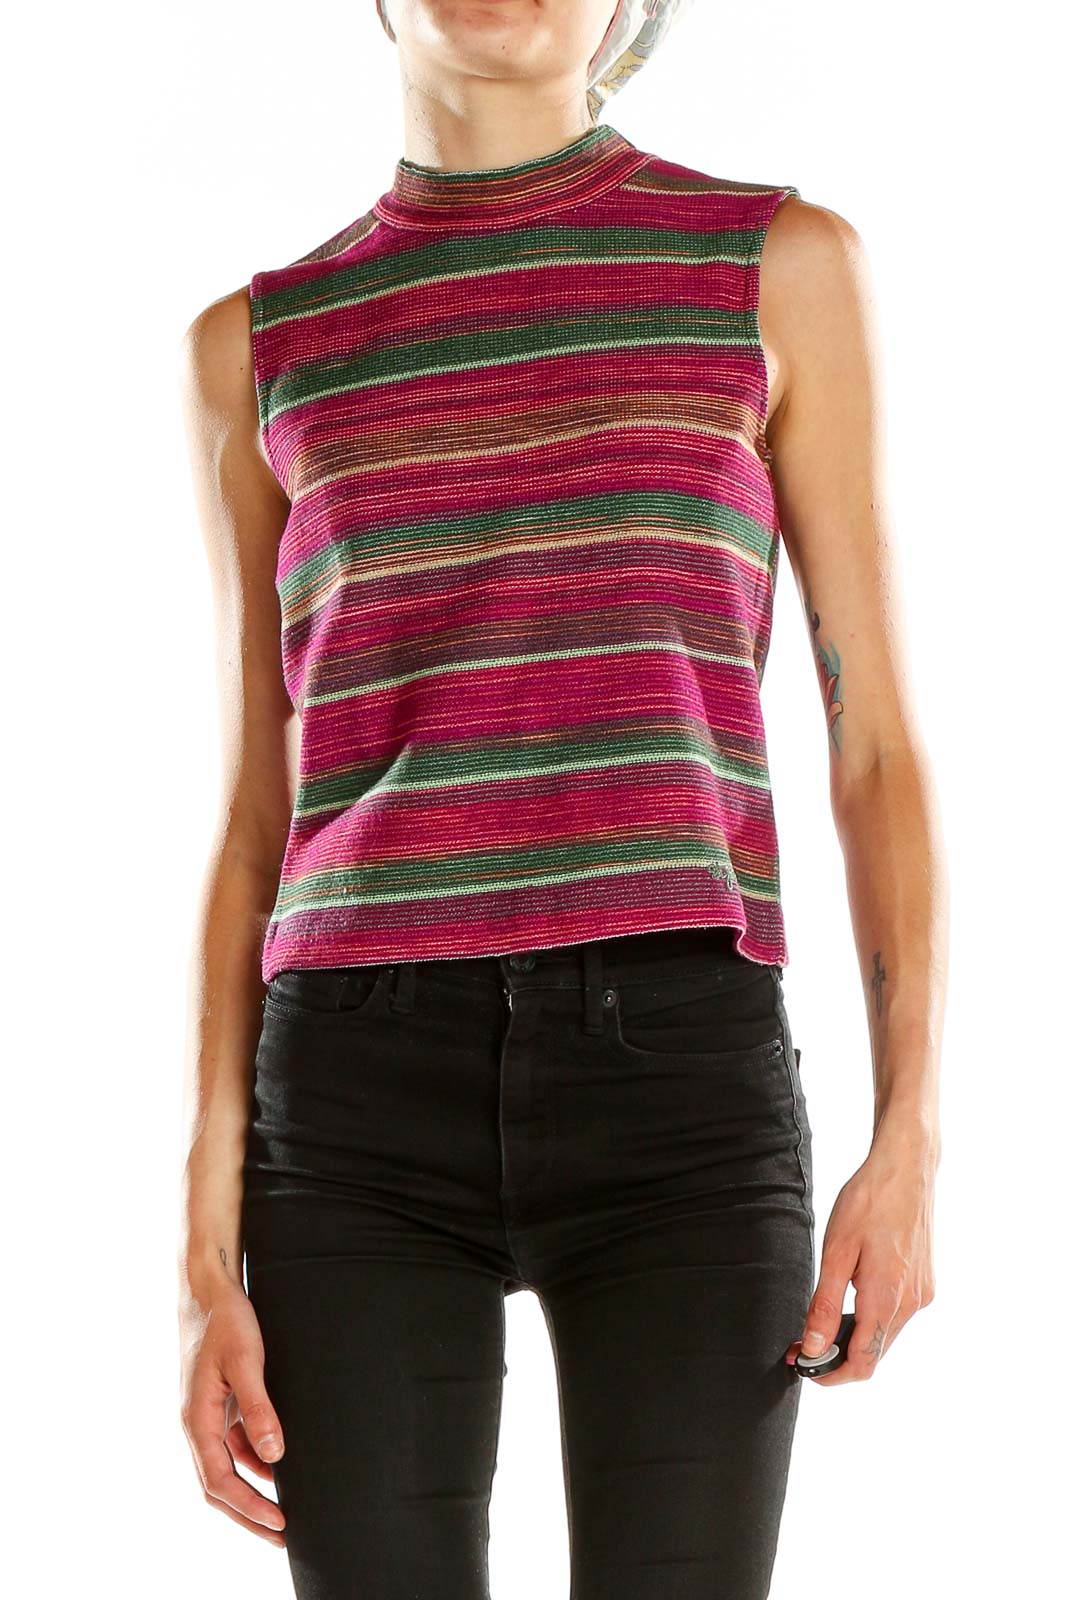 Multicolor Striped Woven Chic Vintage Top Front